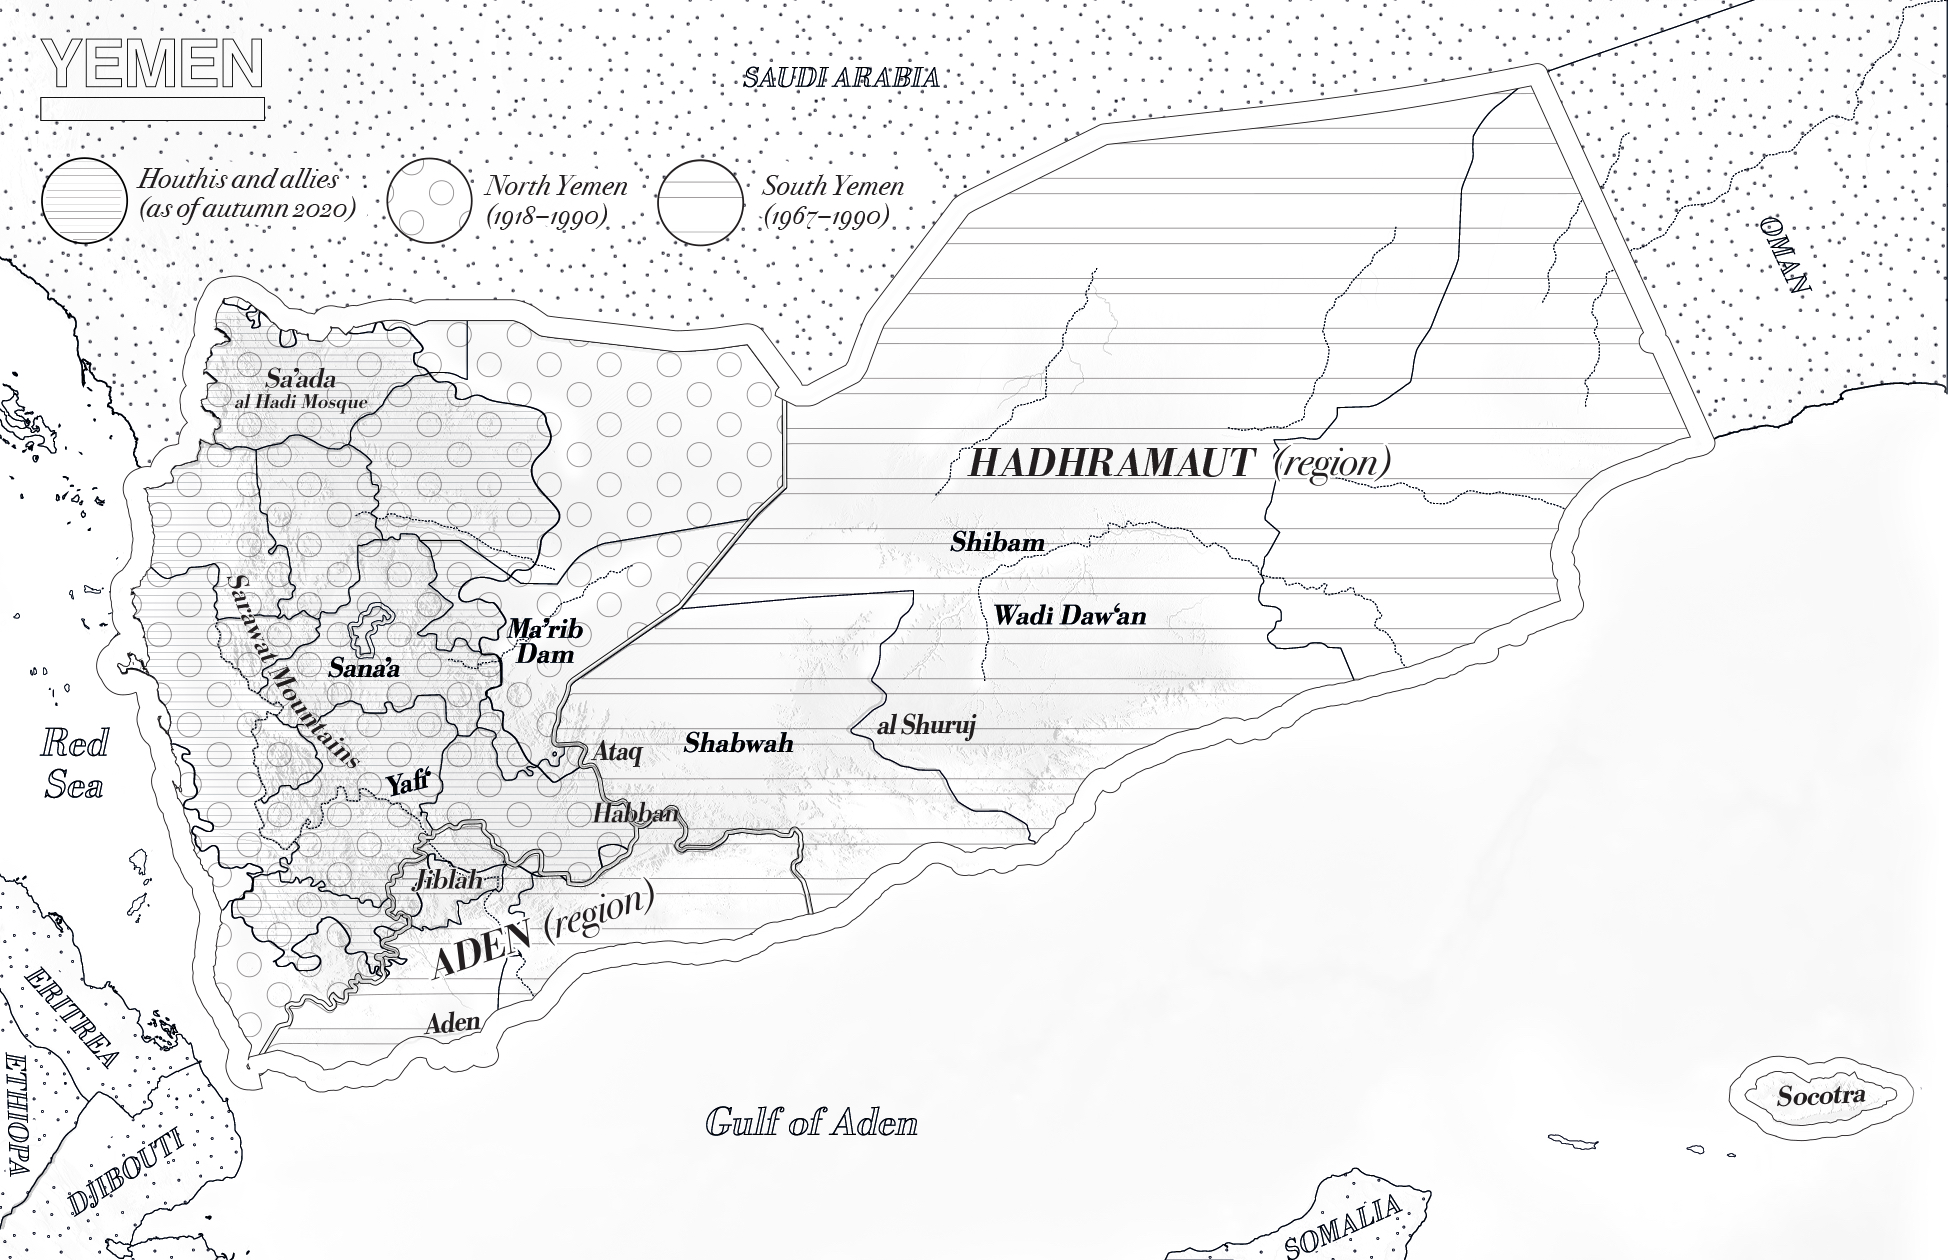 A map of Yemen with the cities mentioned in the article highlighted, displaying different regions of conflict